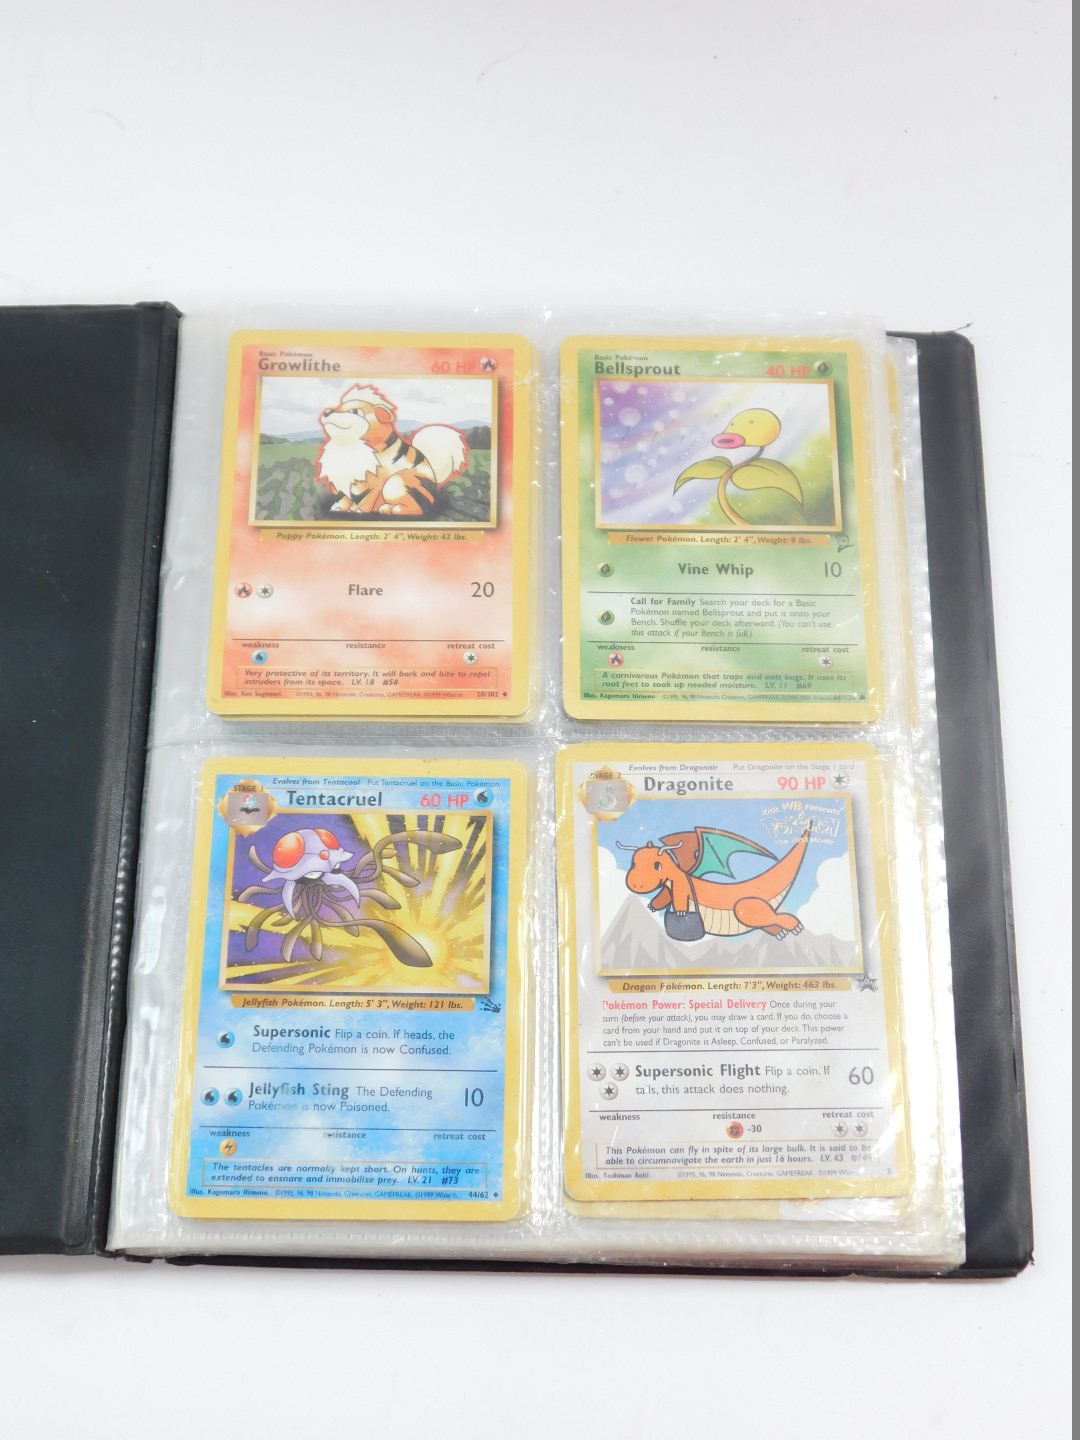 Pokemon Trading Cards, comprising Growlithe (4)., Bellsprout (2)., Tentacruel., Dragonite., Weedle - Image 2 of 3